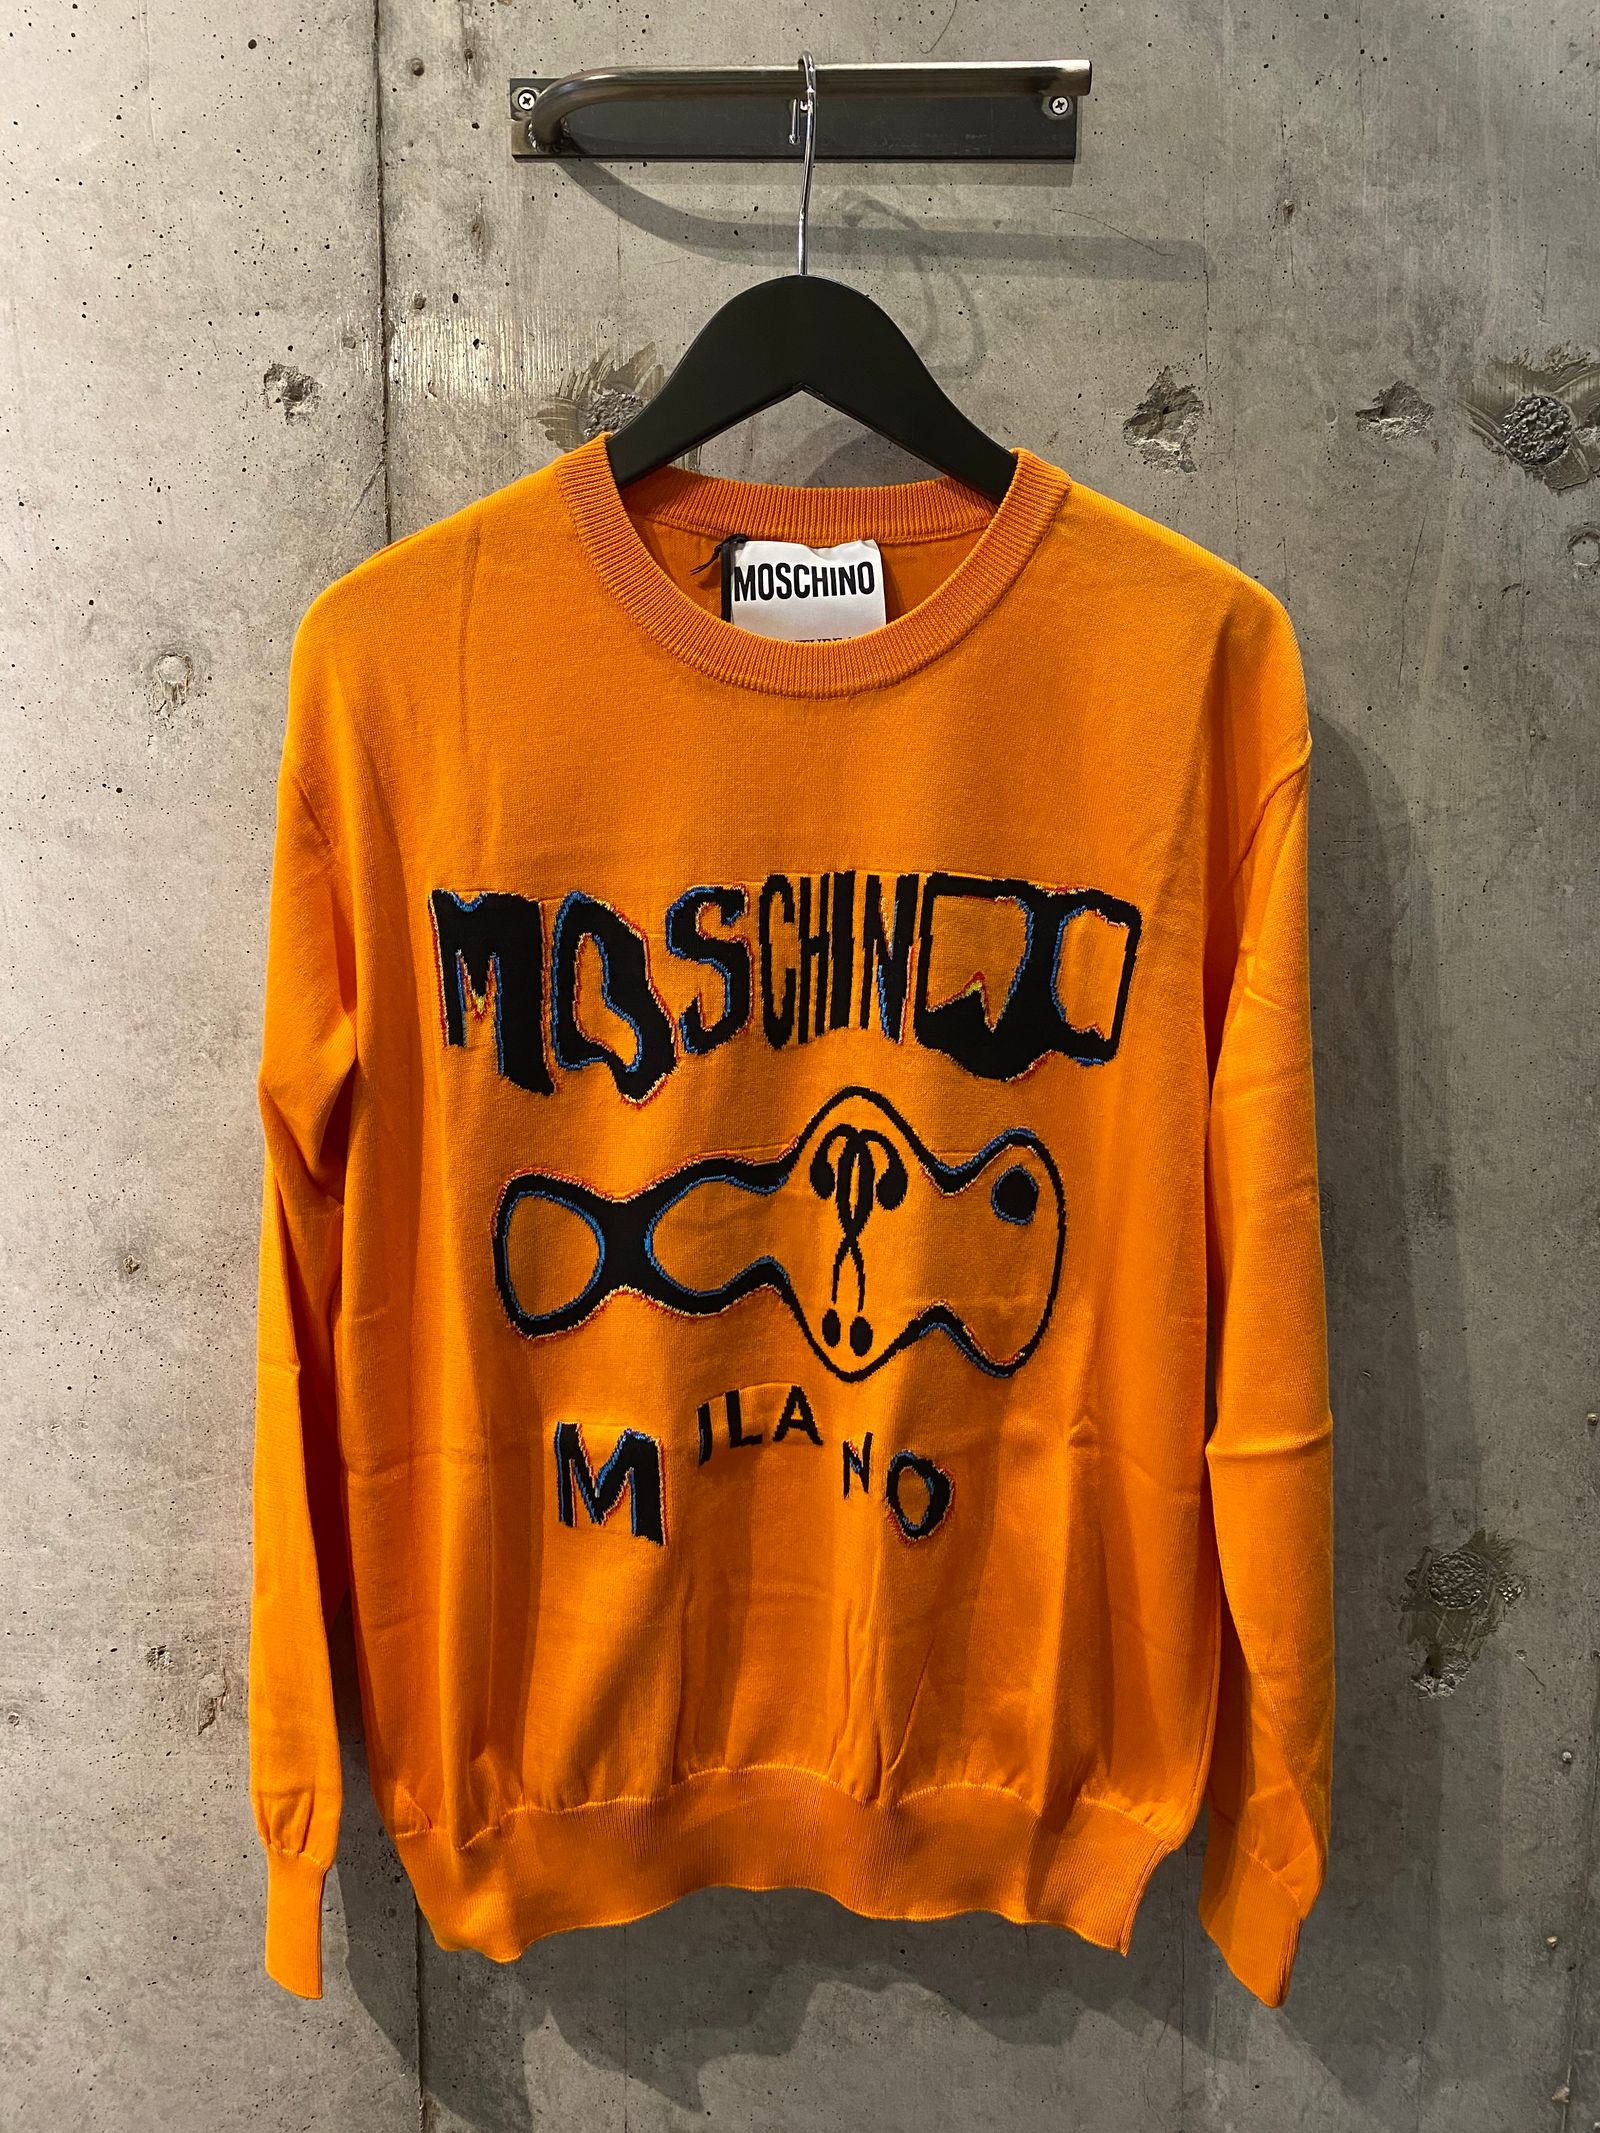 MOSCHINO - モスキーノ |通販ストア R and another stories